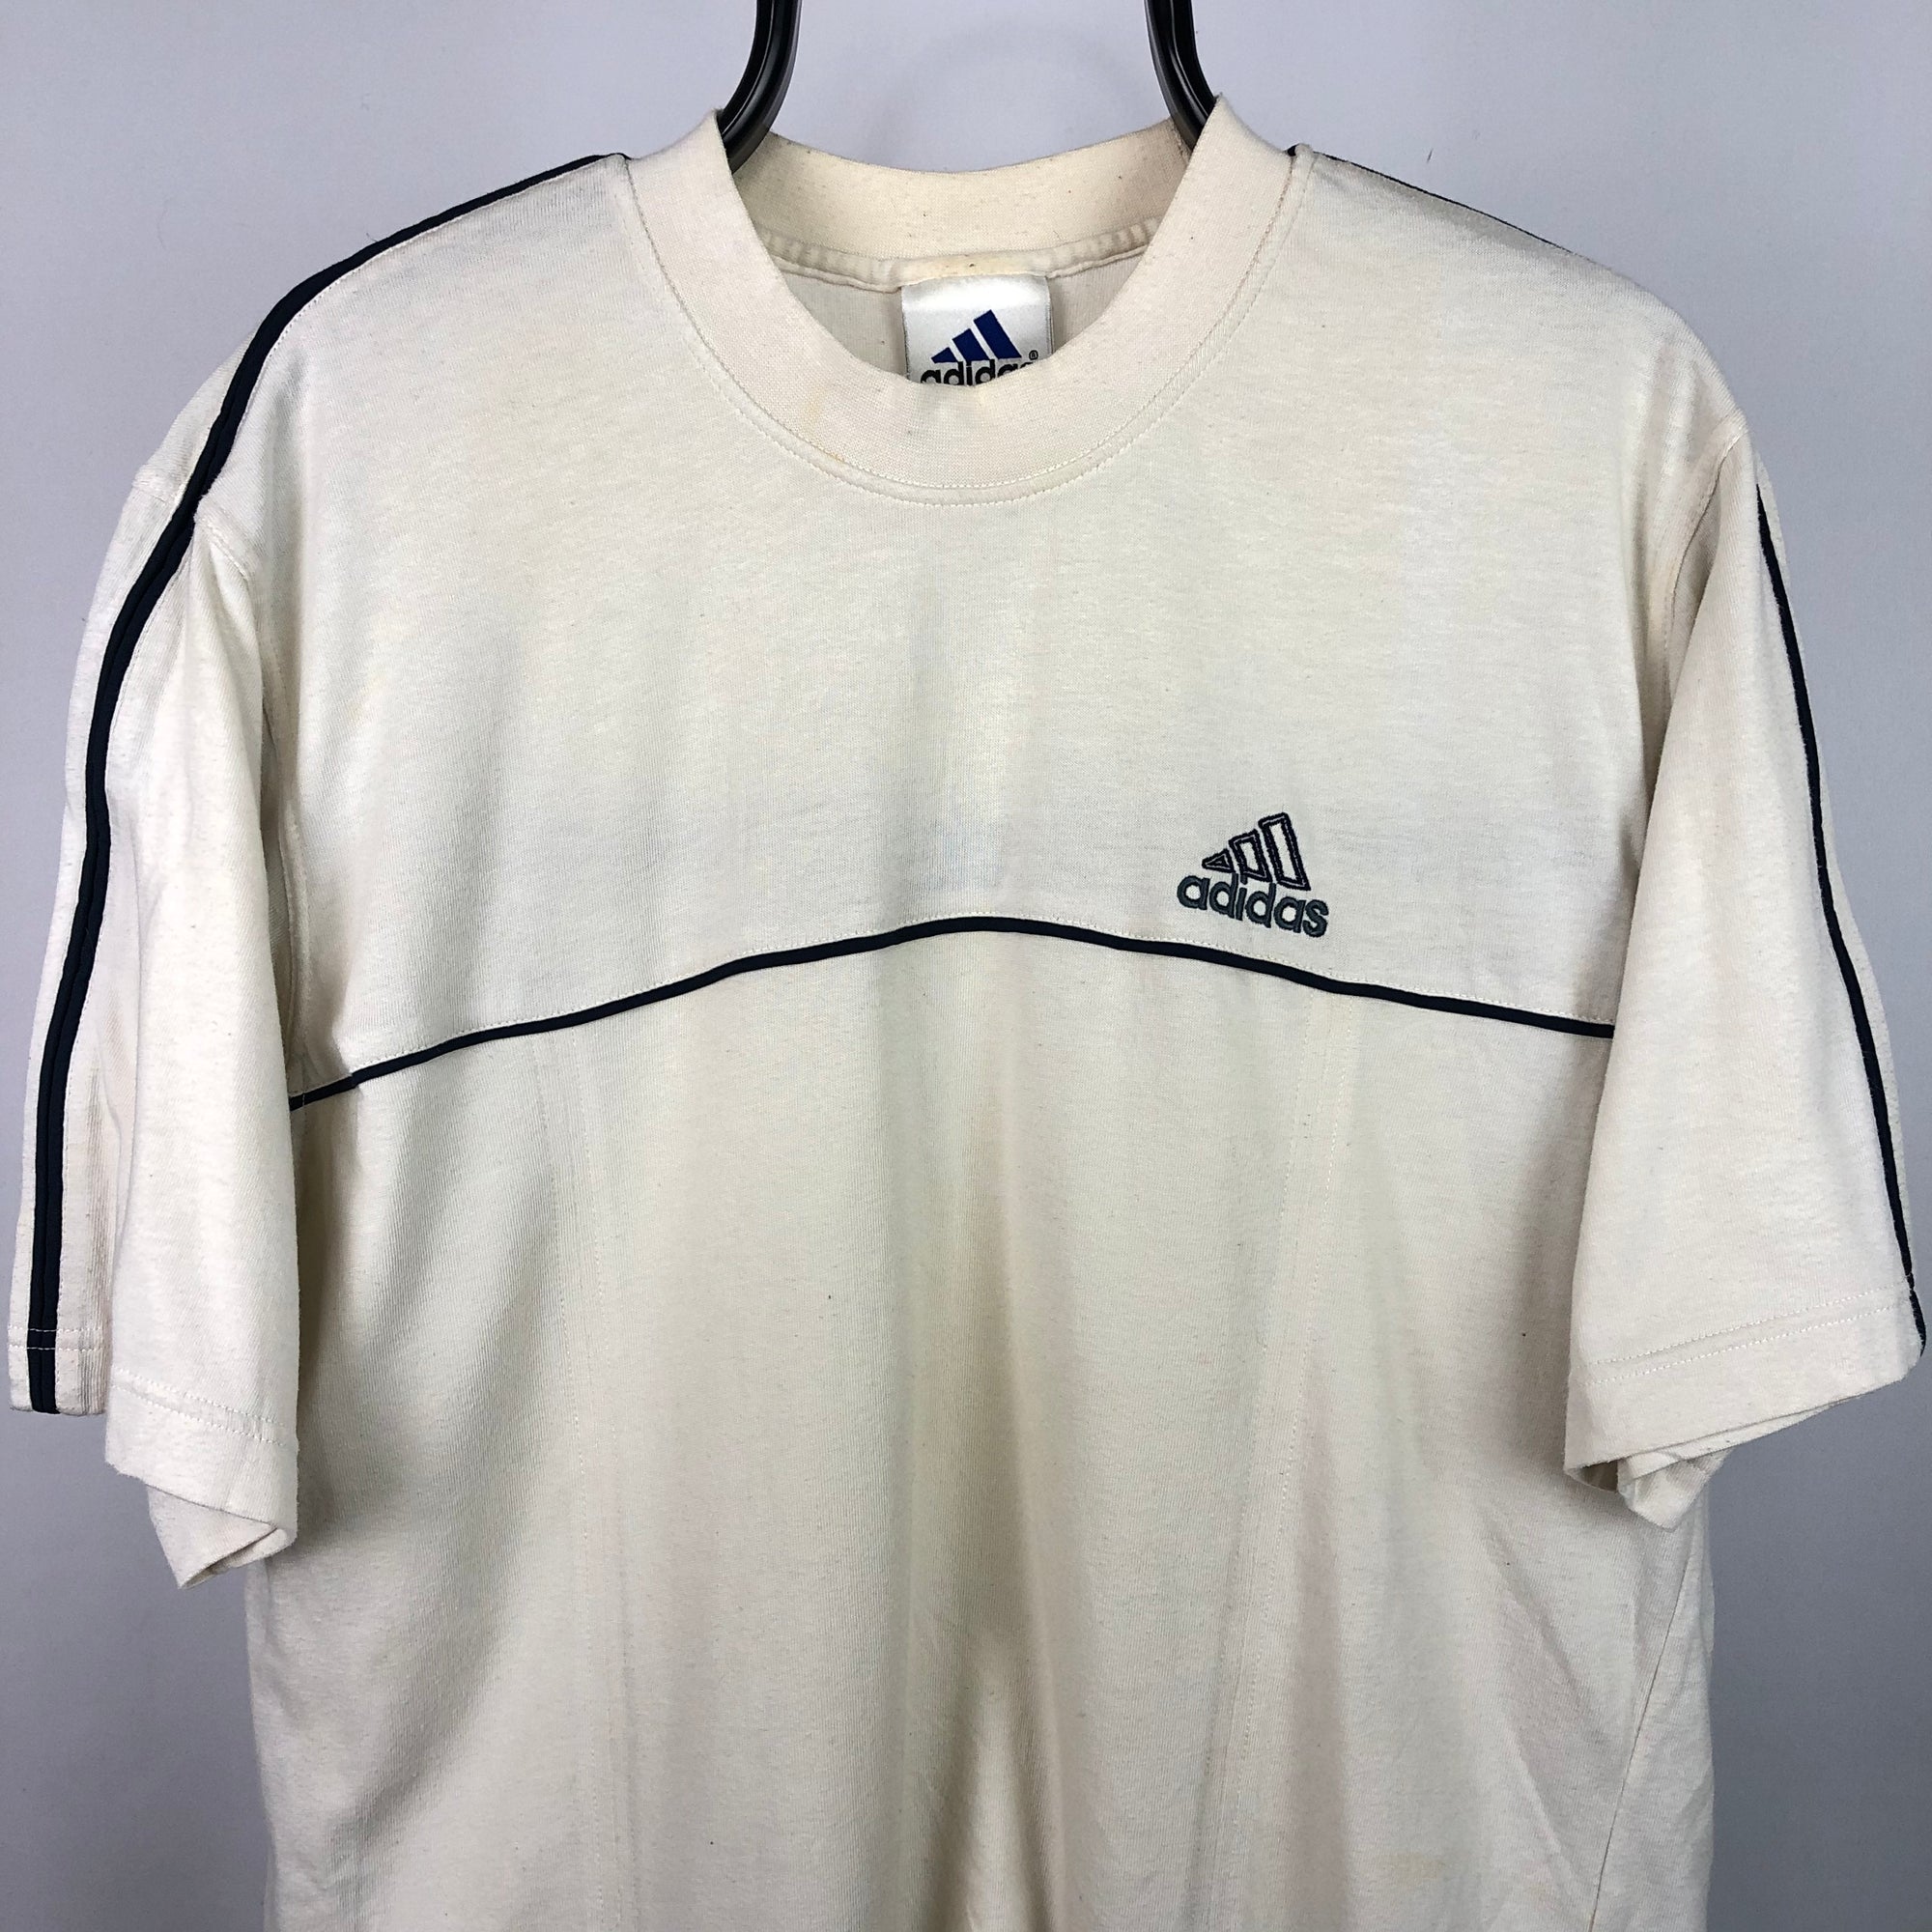 Vintage 90s Adidas Embroidered Logo Tee in Cream - Men's Large/Women's XL